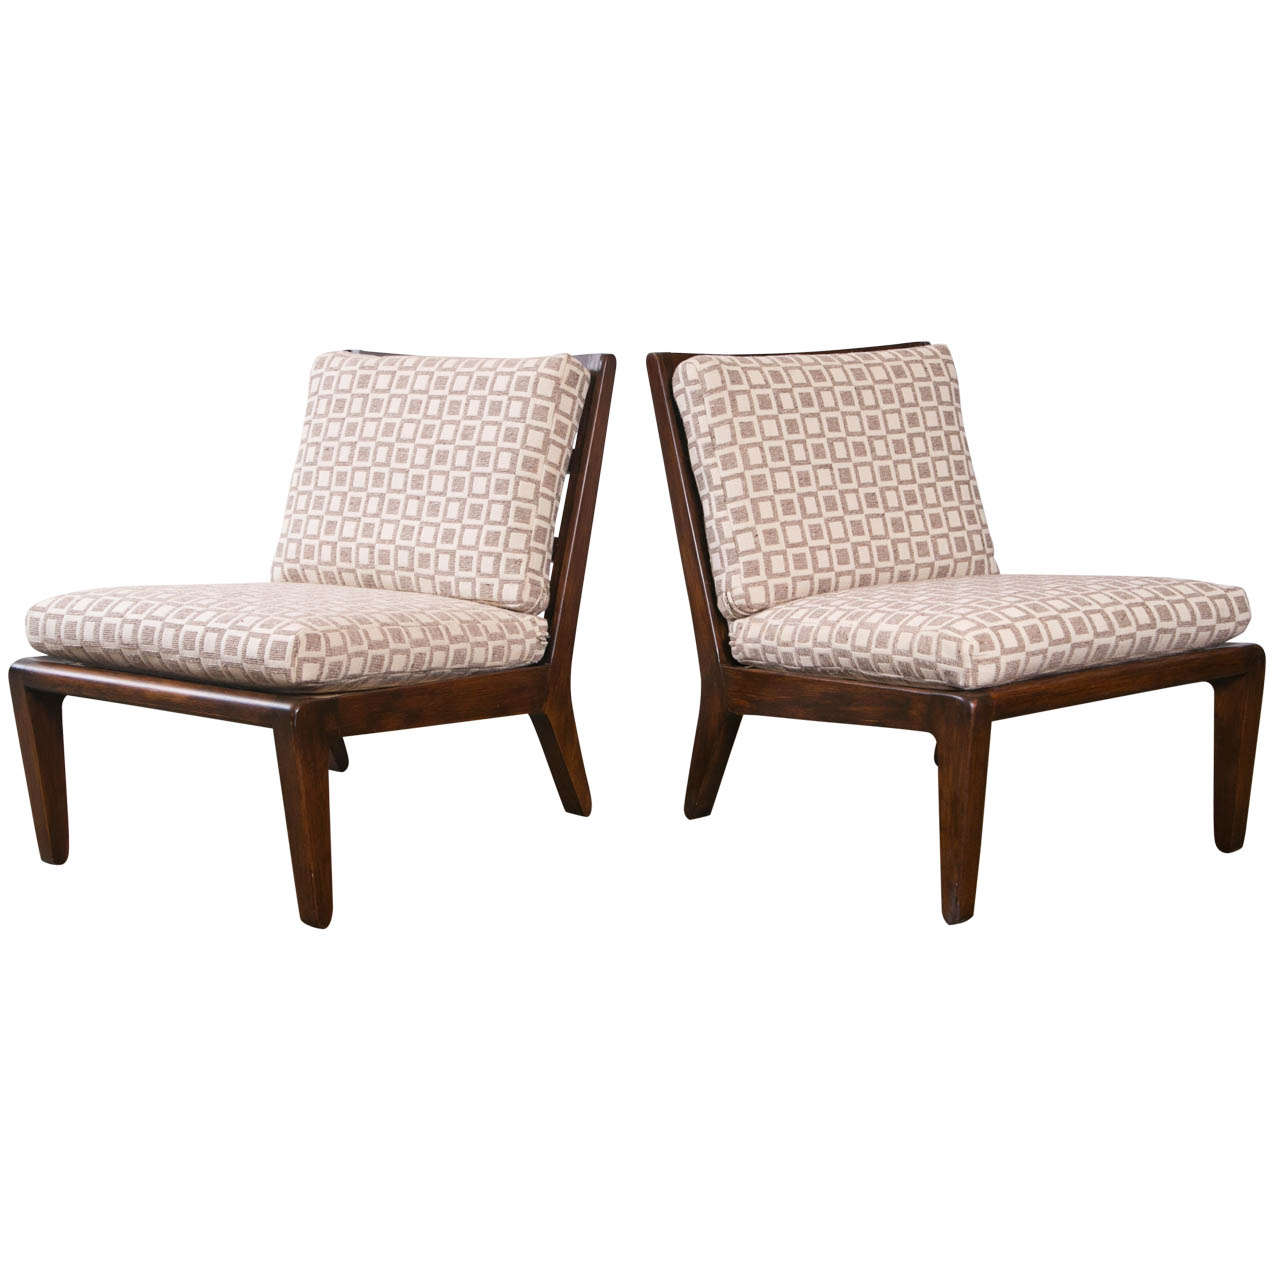 Pair of Armless Chairs In The Style Of Robsjohn-Gibbings For Widdicomb For Sale